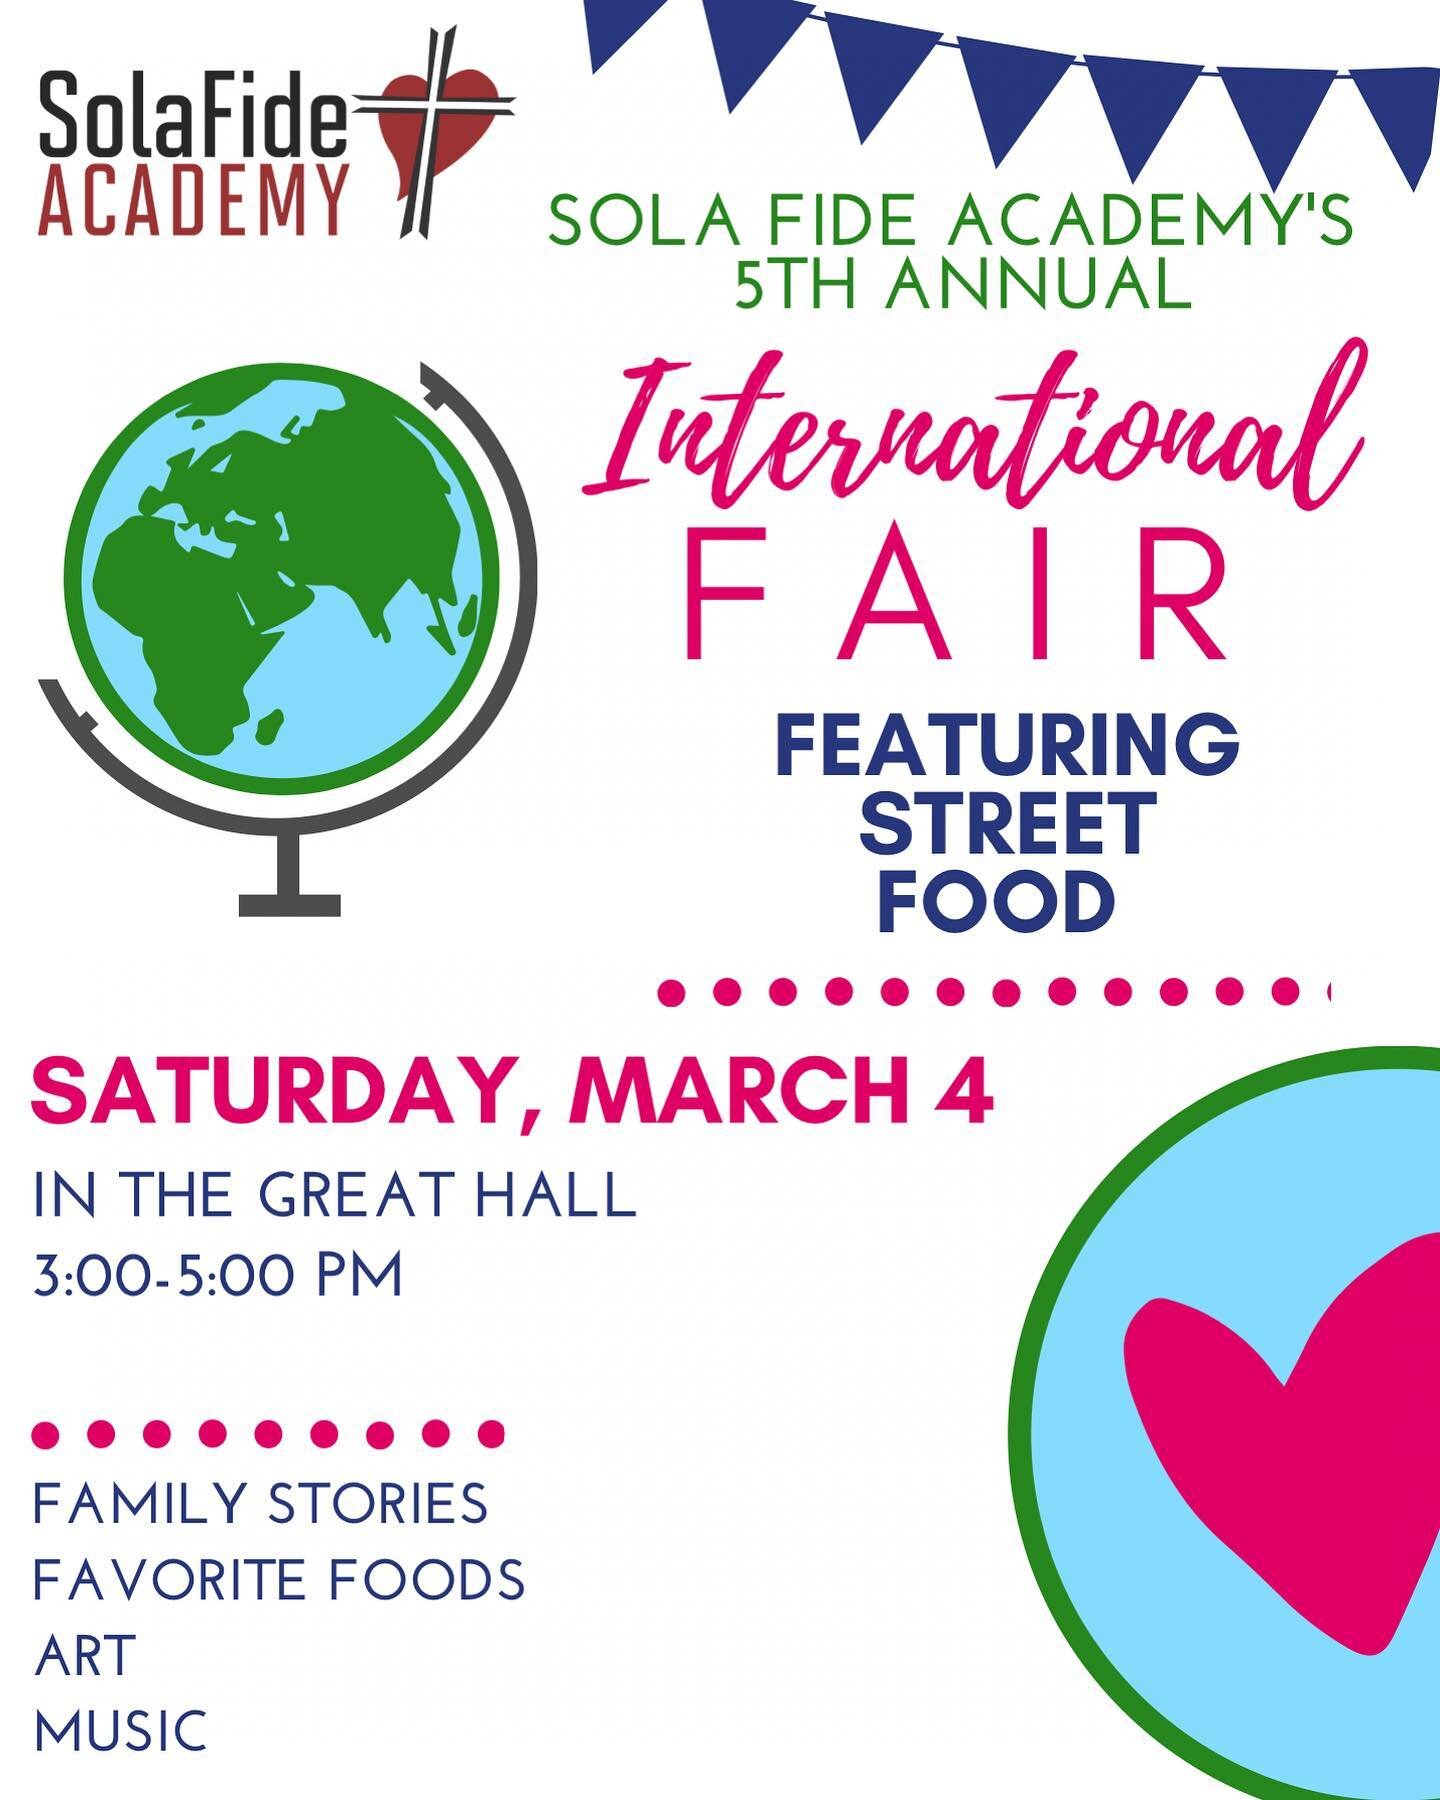 Come on out to International Fair today from 3-5pm and learn more about your school community! 🌎